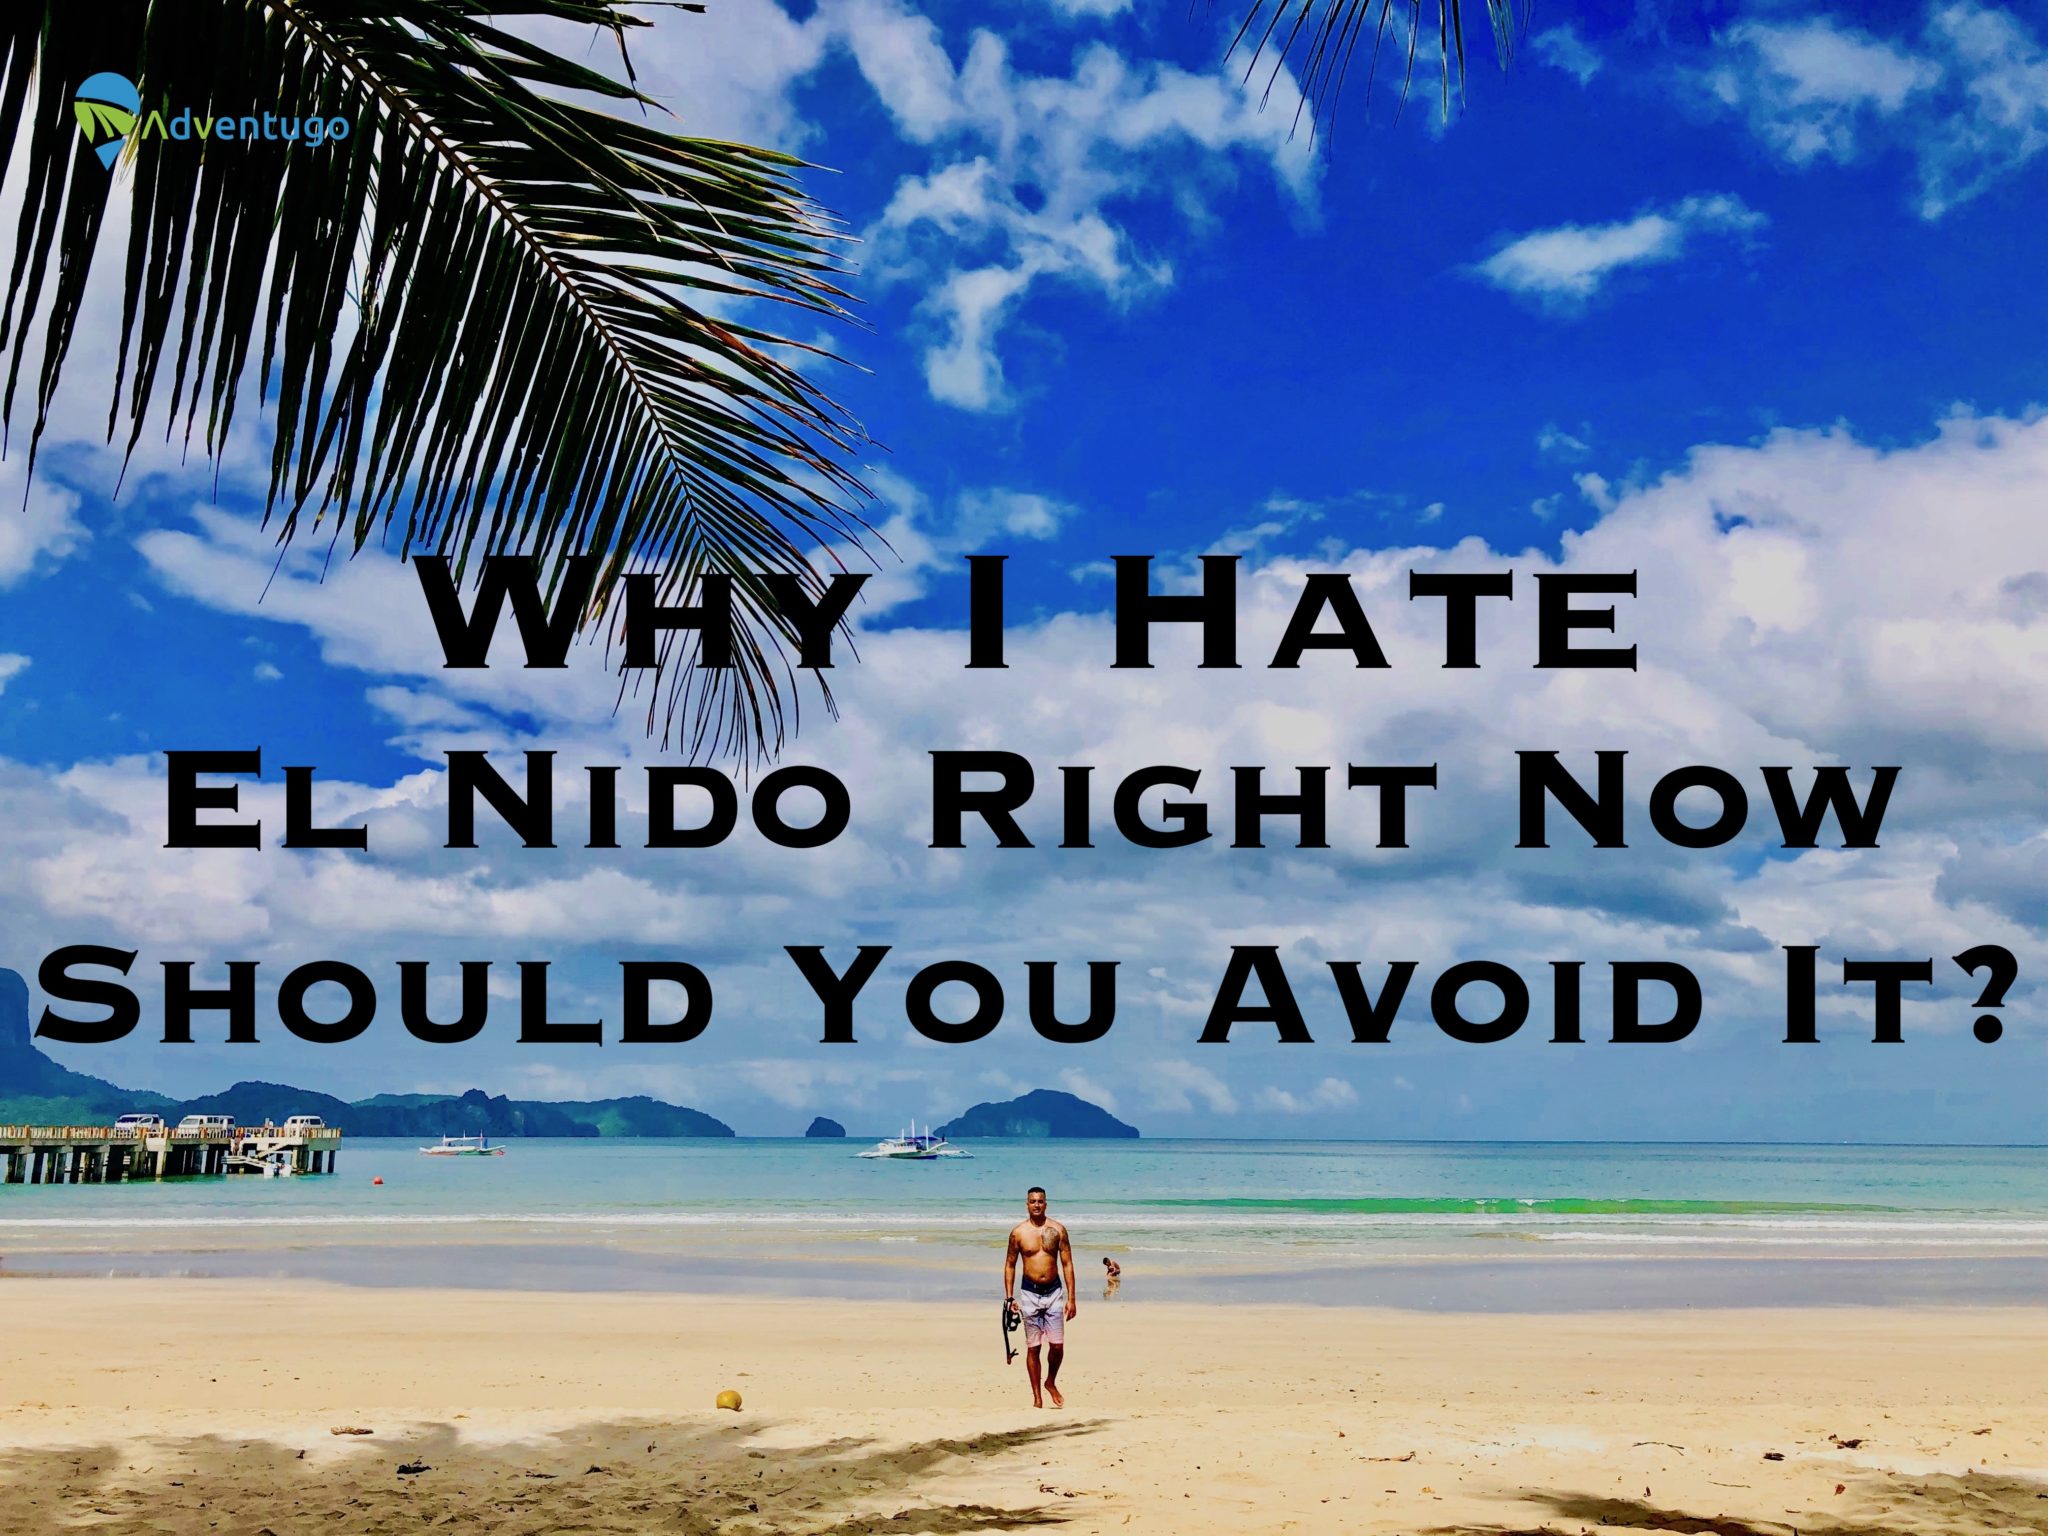 Why I Hate El Nido Right Now, Should I Avoid It?